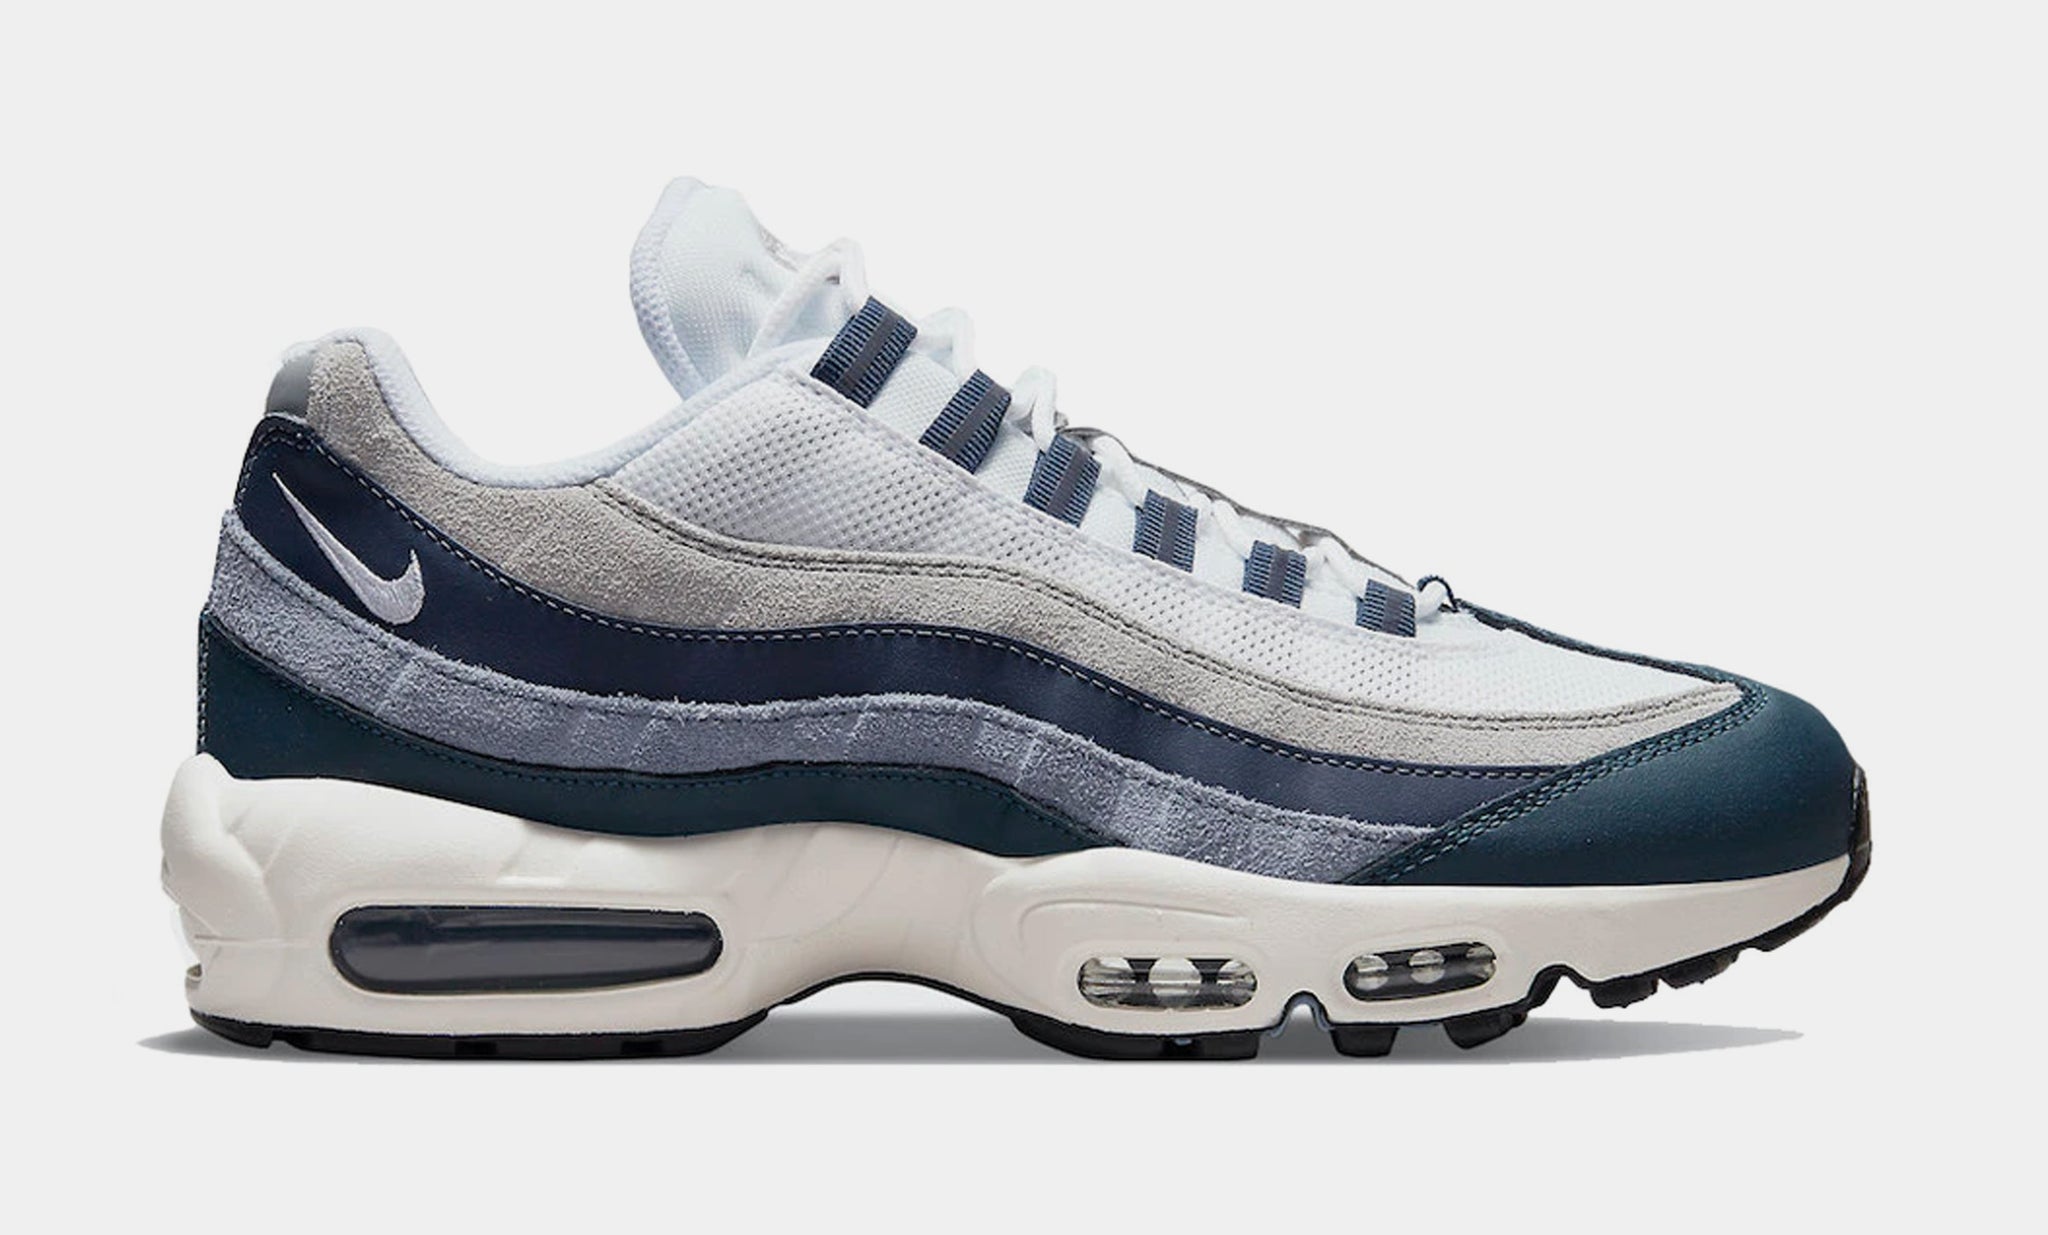 Air Max 95 Mens Lifestyle Shoes (Midnight Navy Blue/White/Grey)